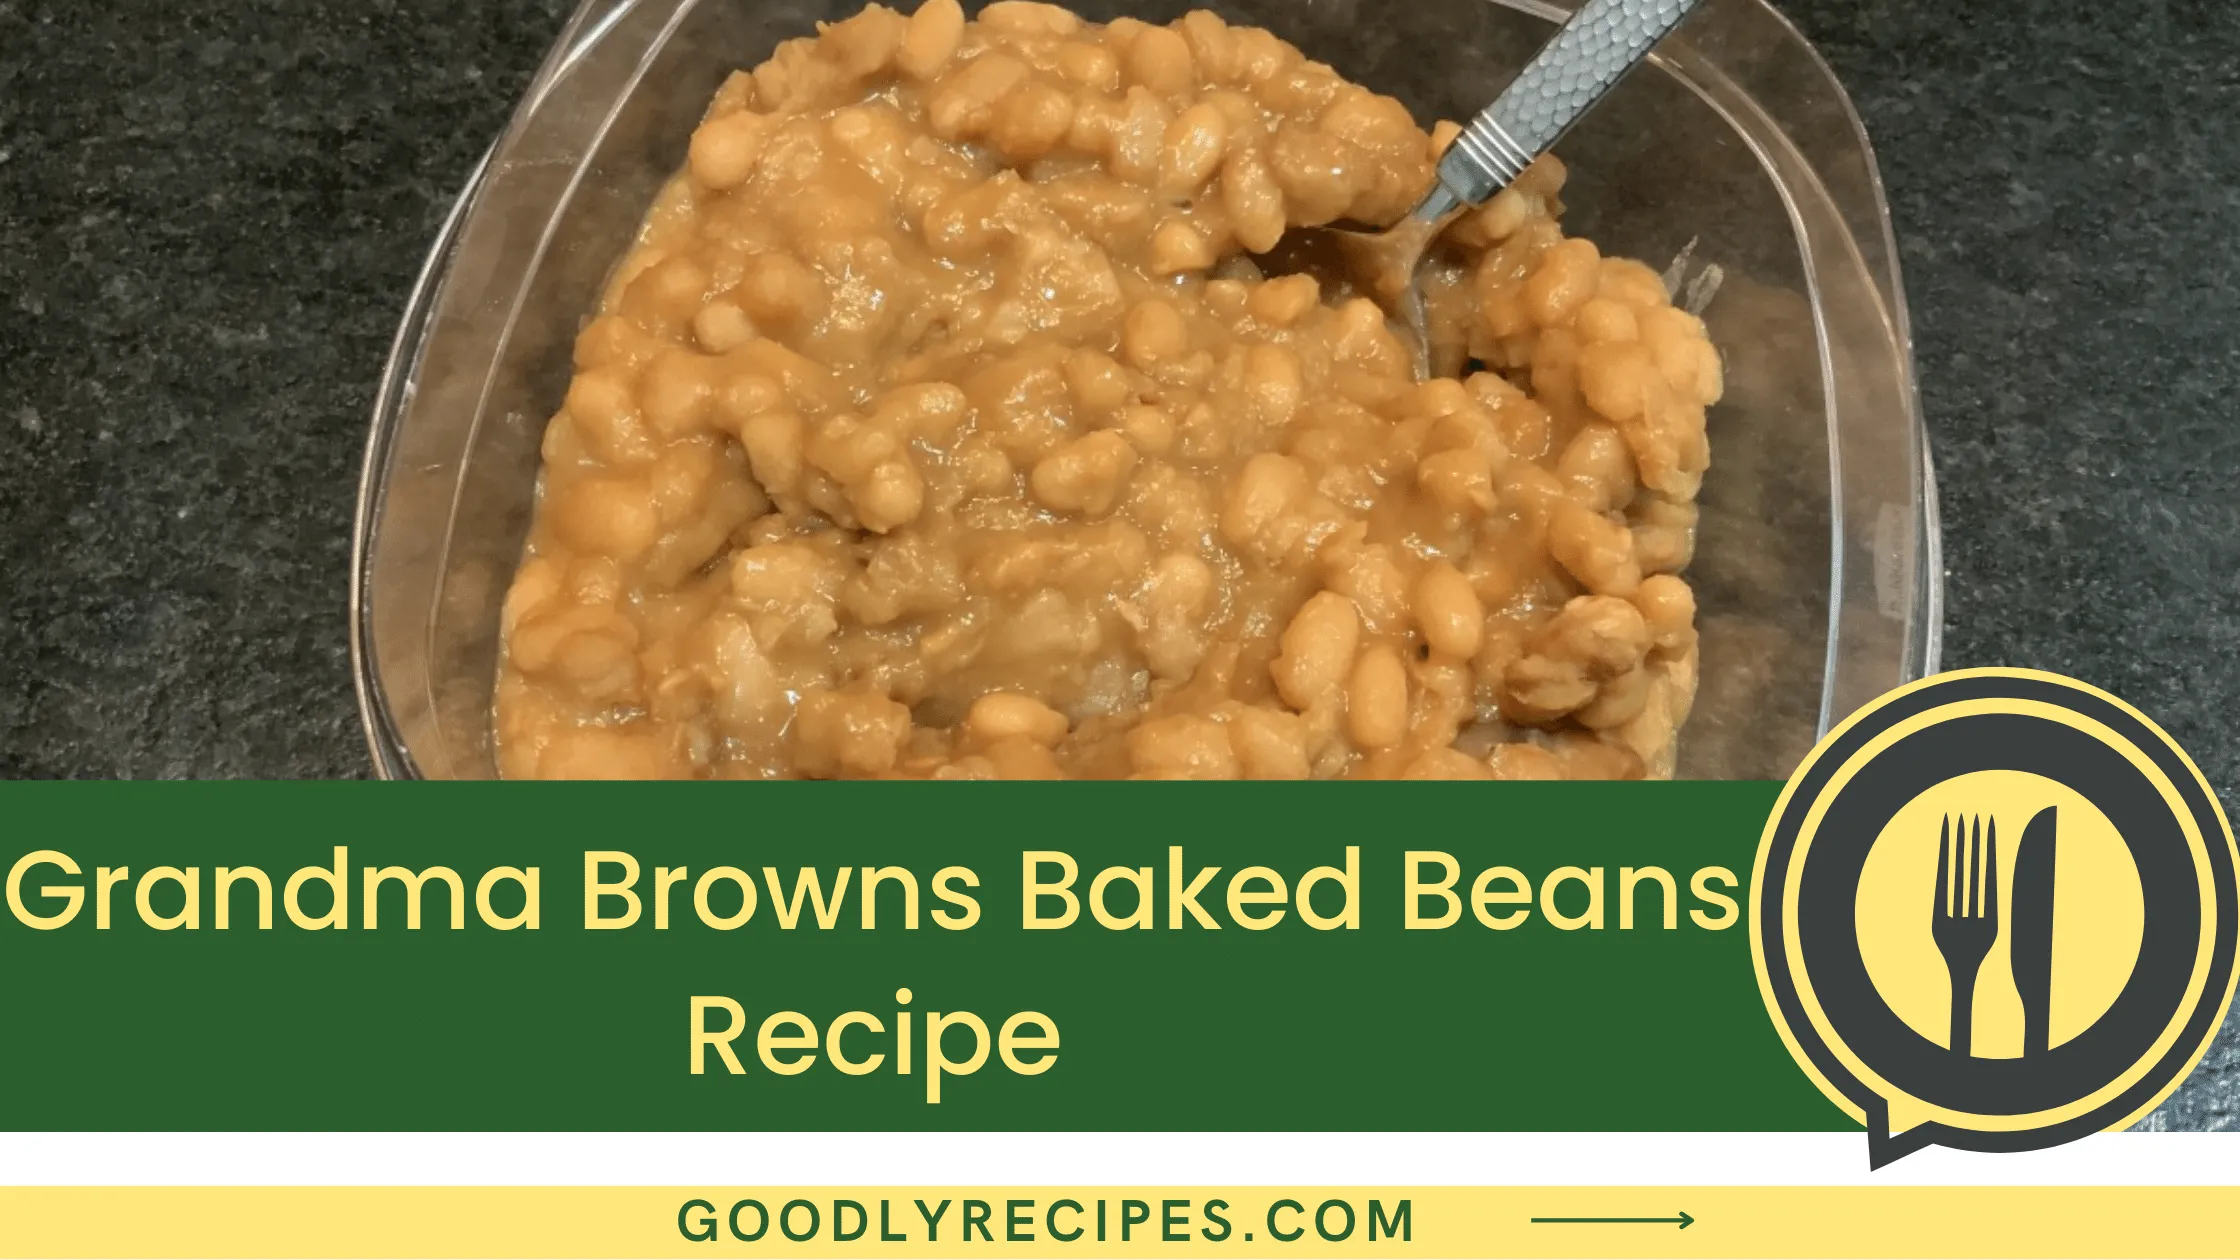 Grandma Browns Baked Beans Recipe - For Food Lovers